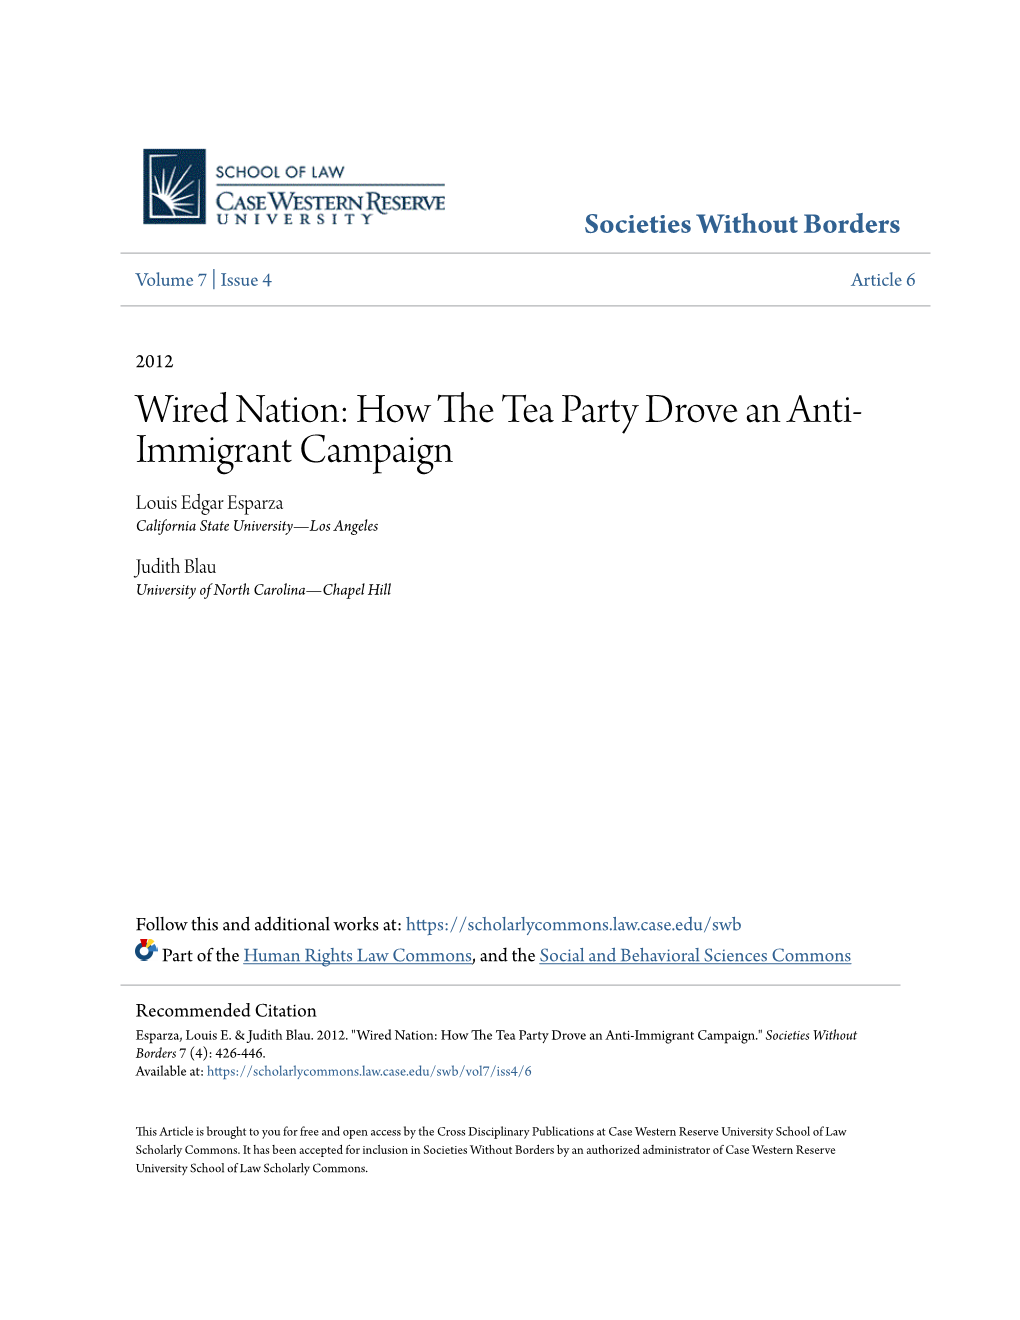 Wired Nation: How the Tea Party Drove an Anti-Immigrant Campaign